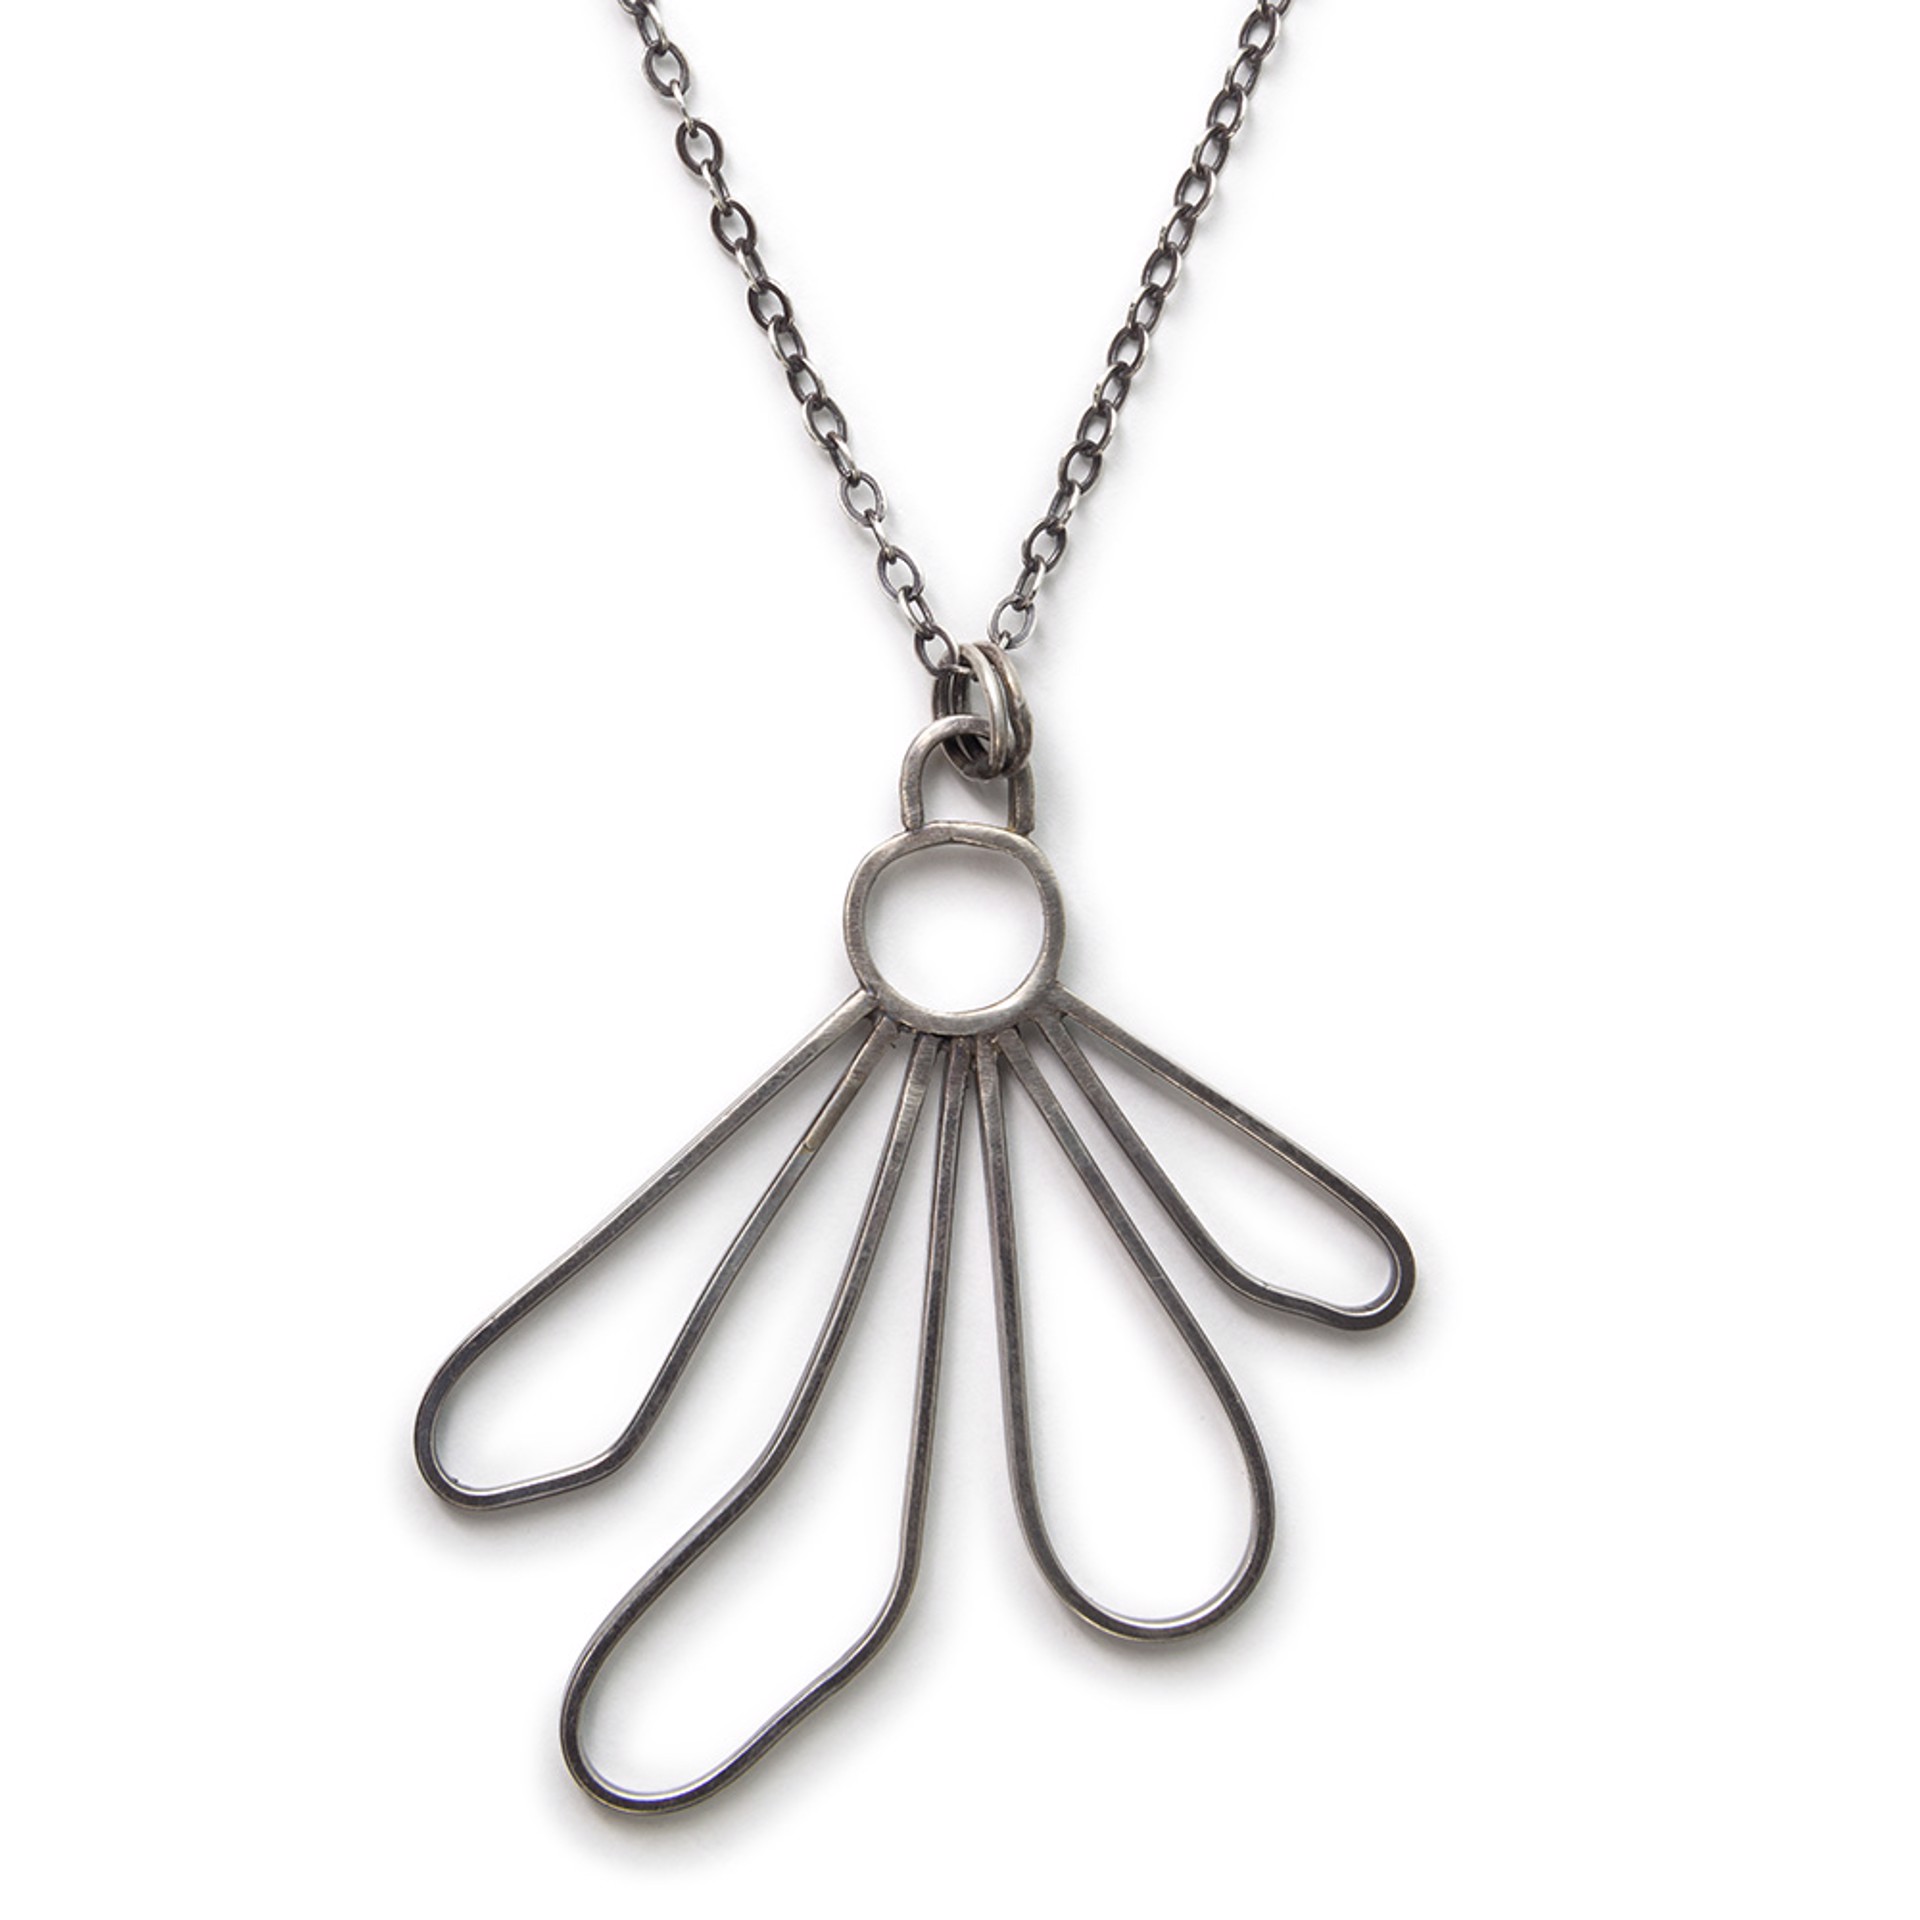 Alpine Lily Necklace by Beth Aimee